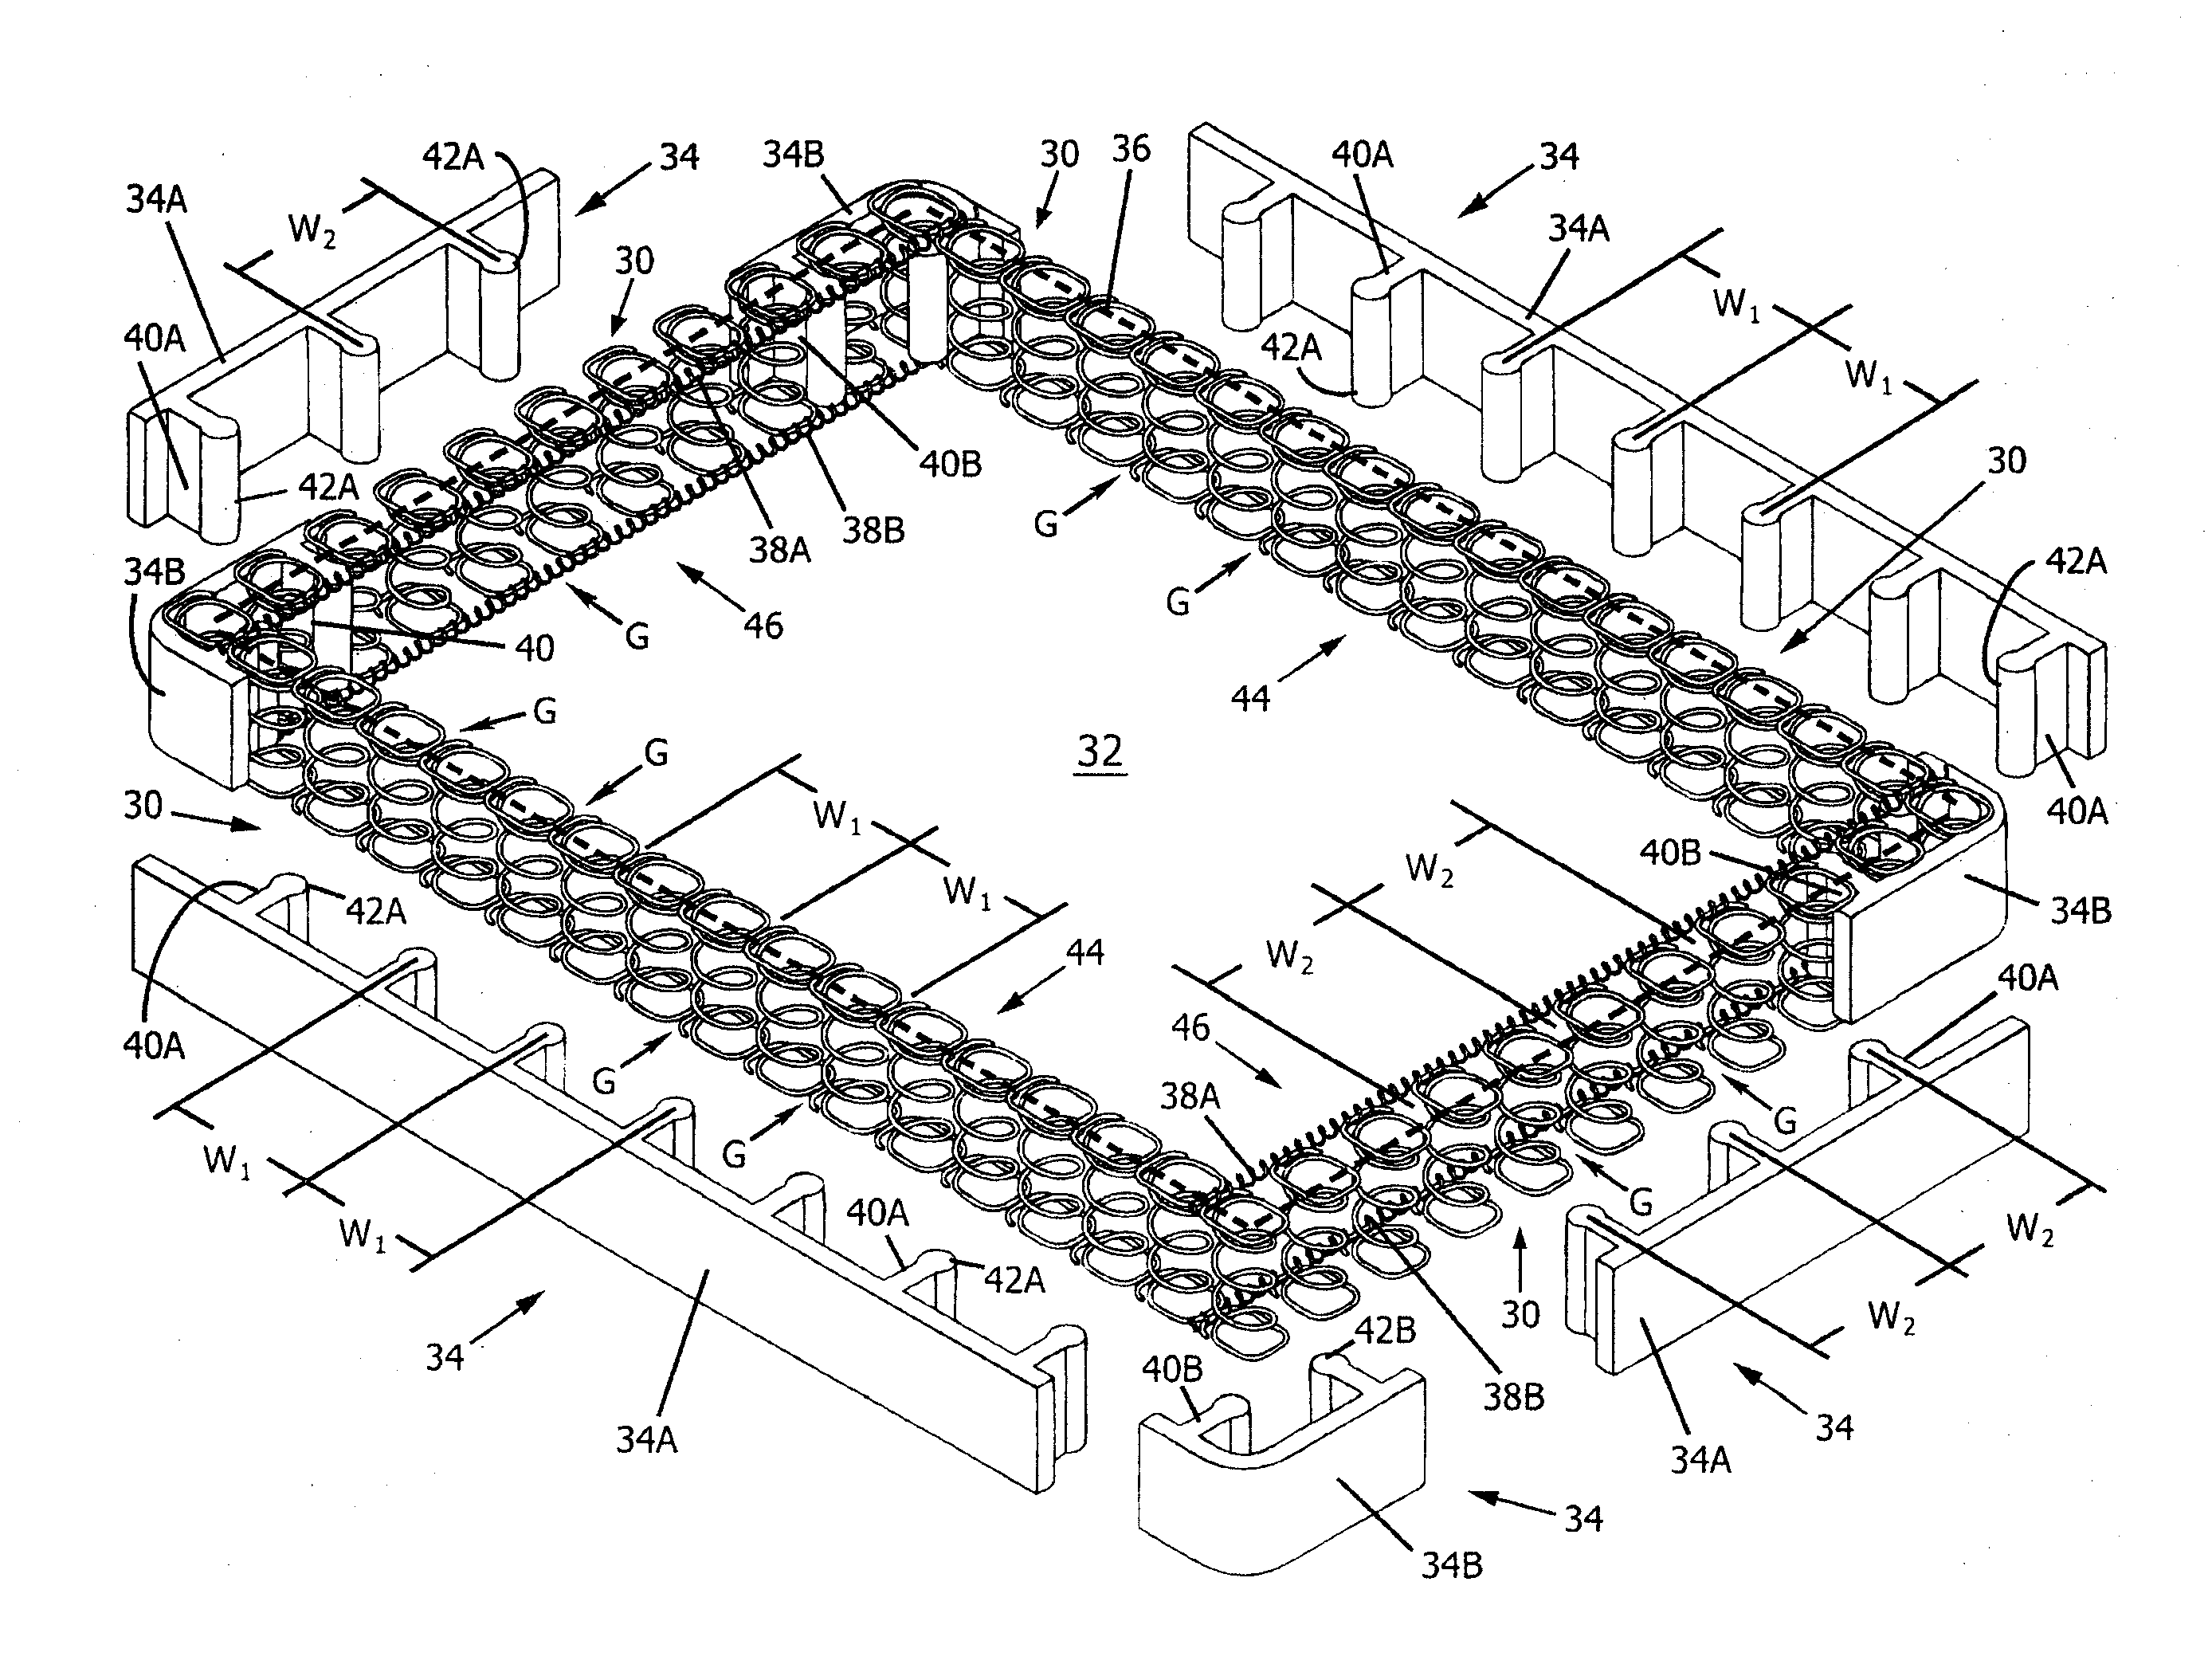 Expandable edge-support members, assemblies, and related methods, suitable for bedding and seating applications and innersprings